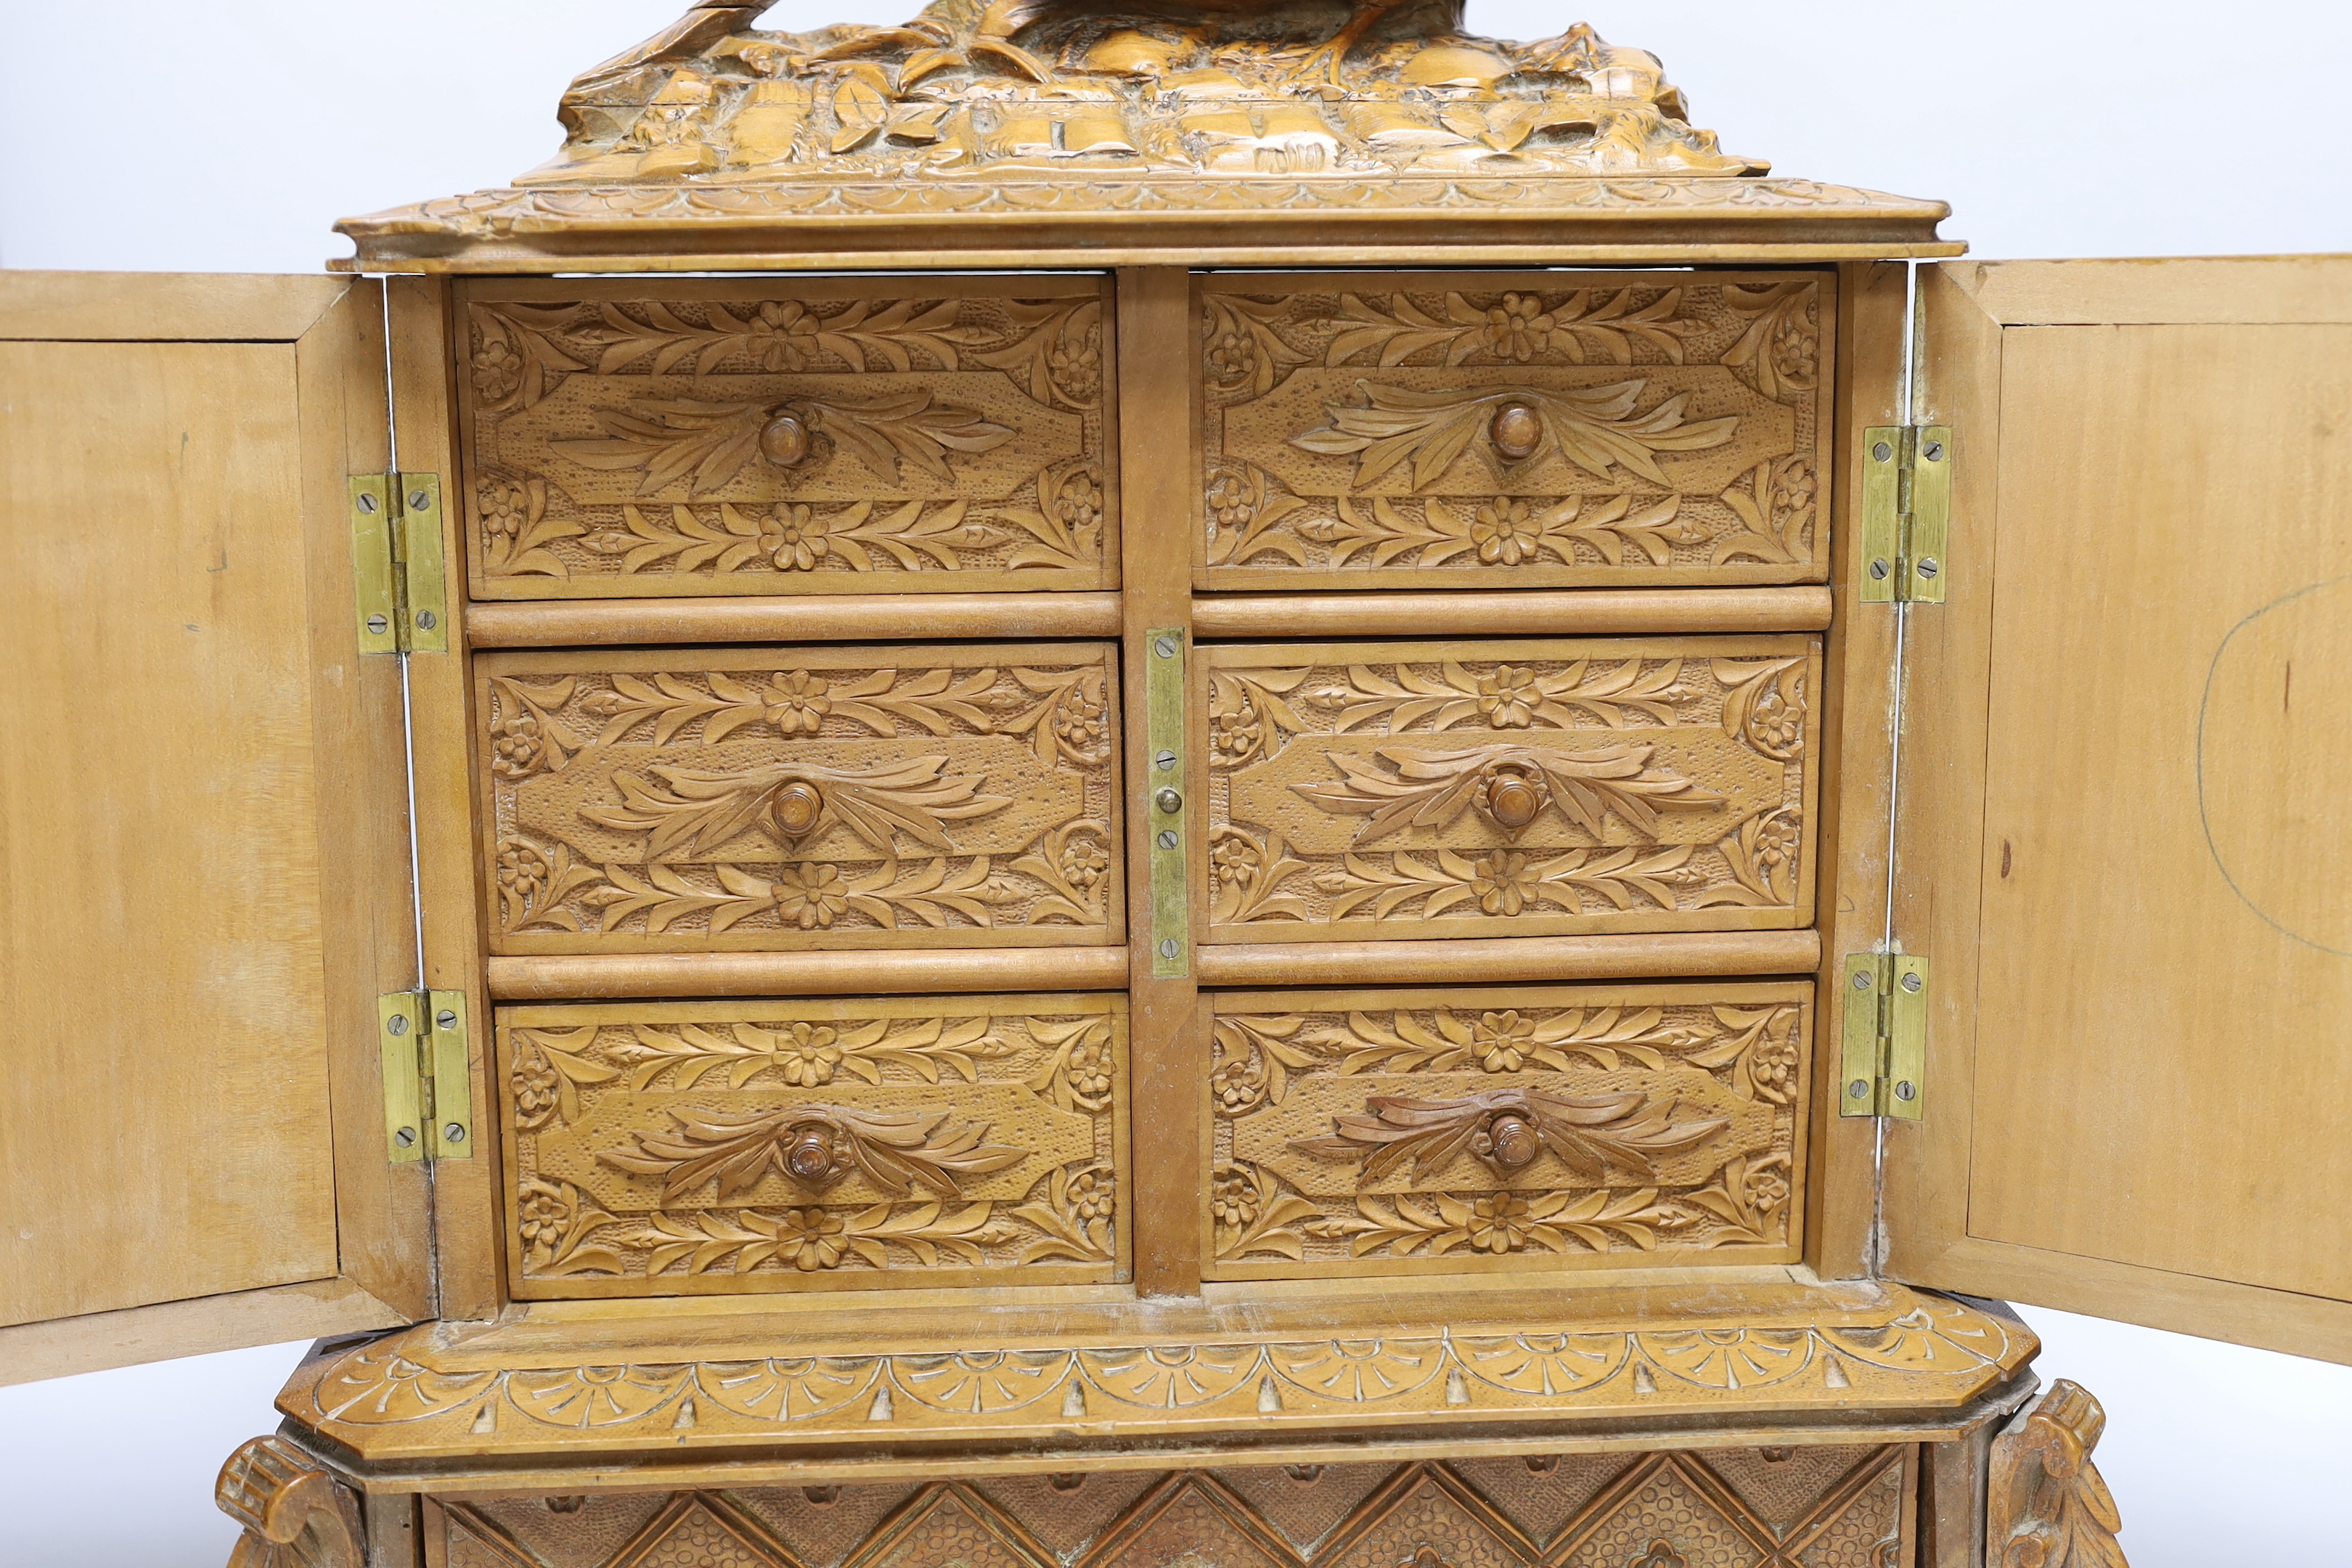 A late 19th century Black Forest carved wooden two door table top cabinet, interior with fitted drawers, surmounted with two pheasants, 51cm high